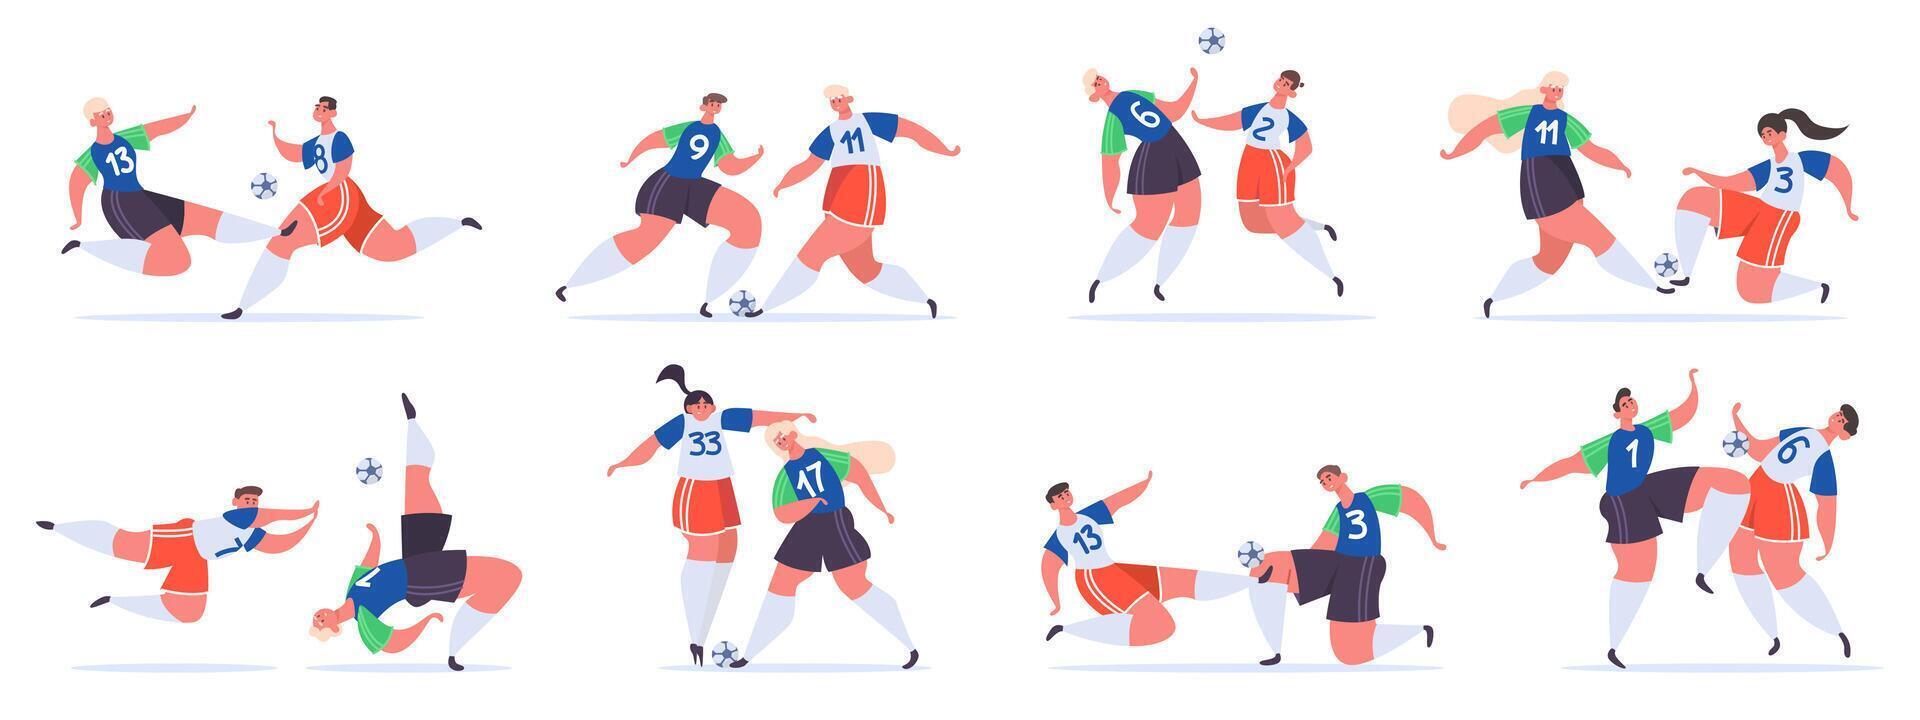 Football players. Soccer sportsmen characters struggle, fighting for ball, soccer overtaking, trick and attack vector illustration set